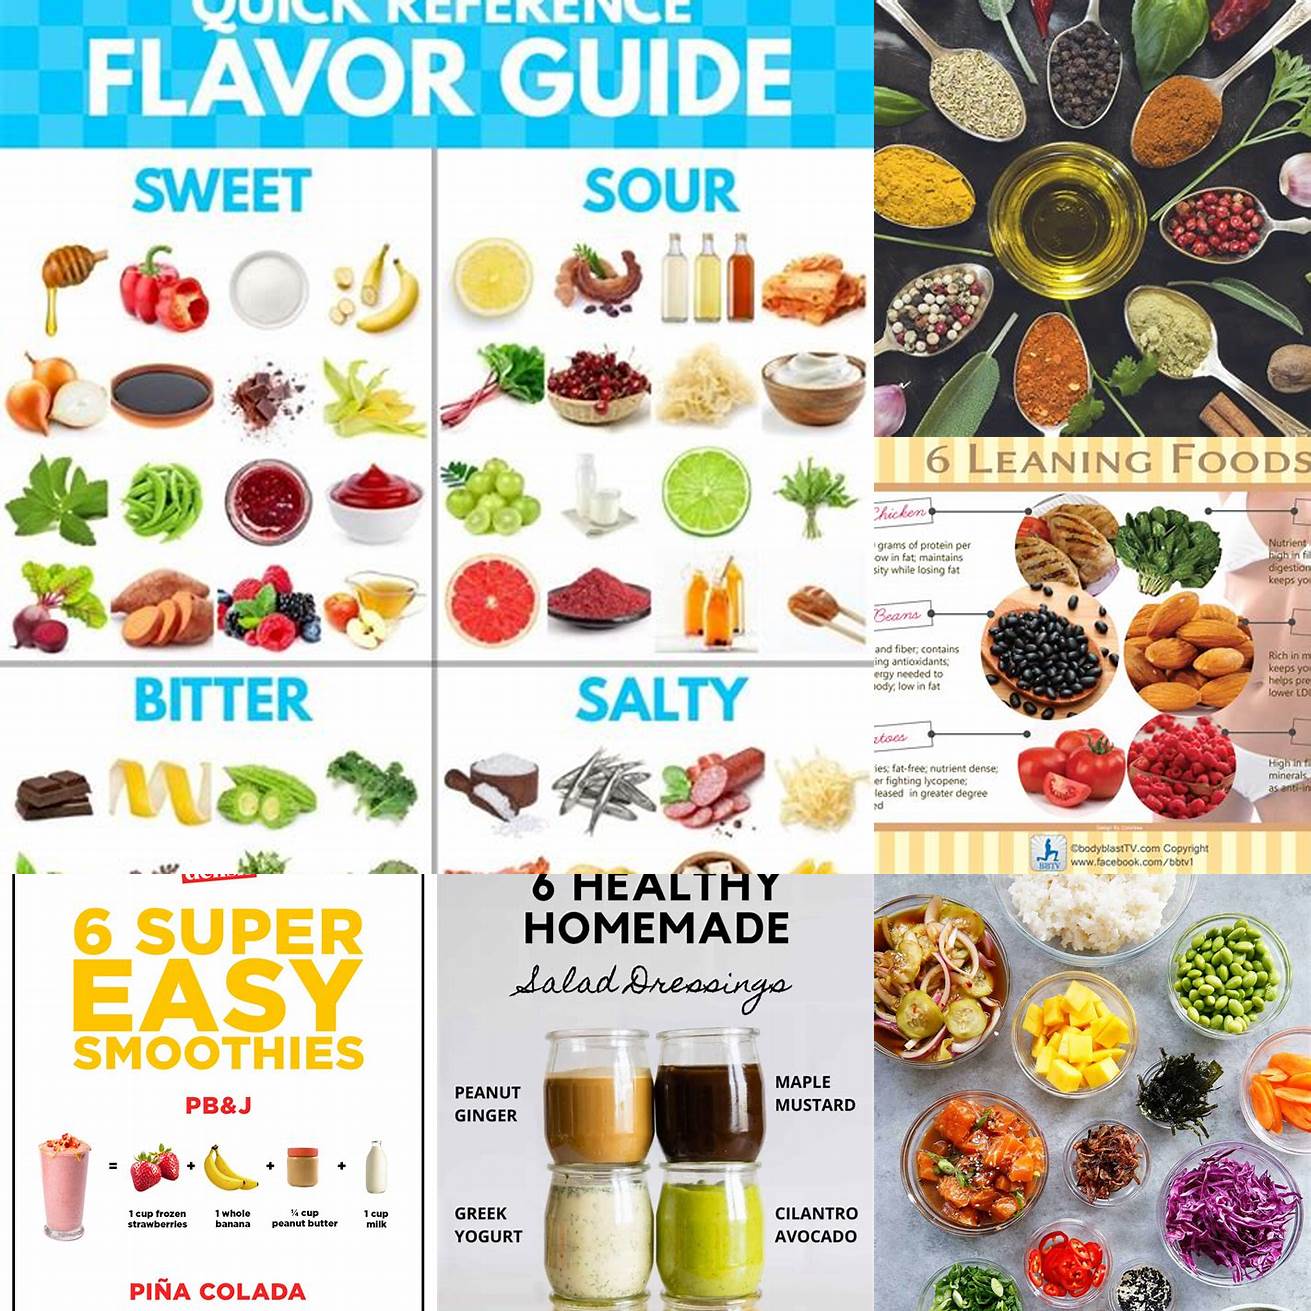 Images of the healthier ingredients used in some flavors